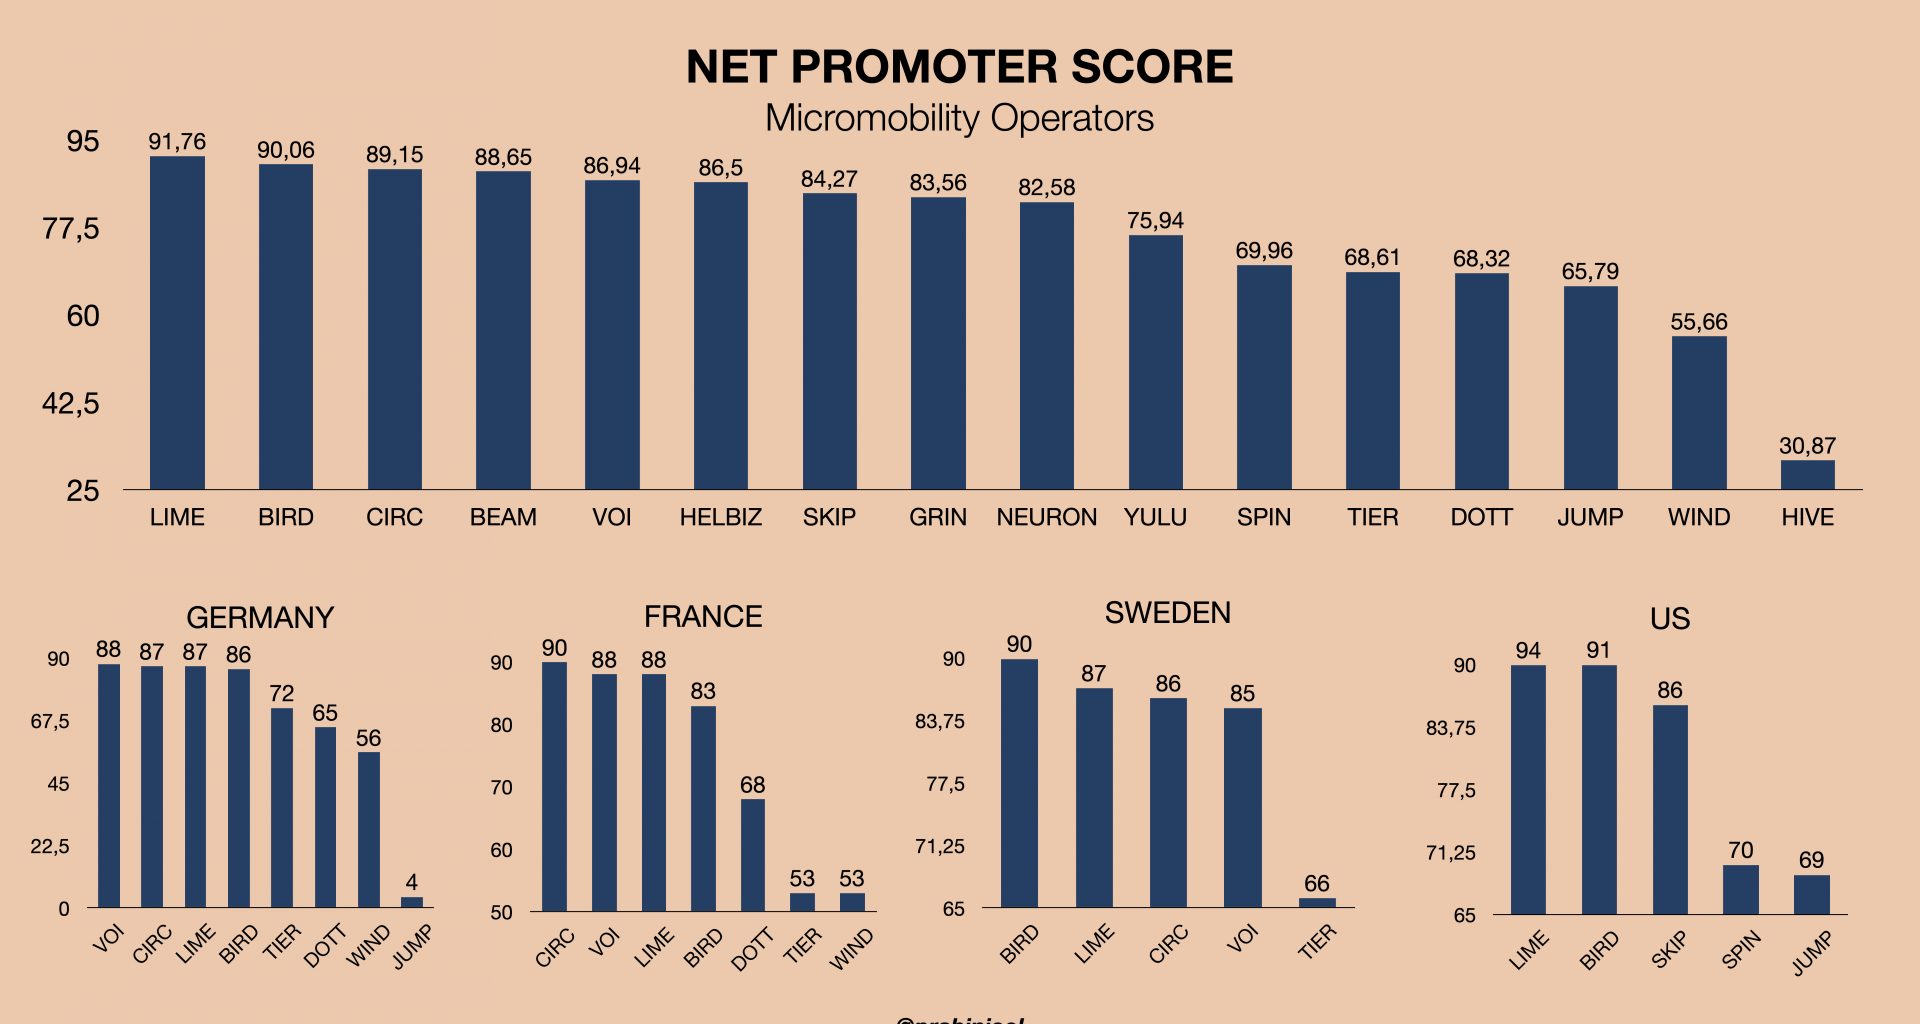 Net Promoter Score for Micromobility Operators